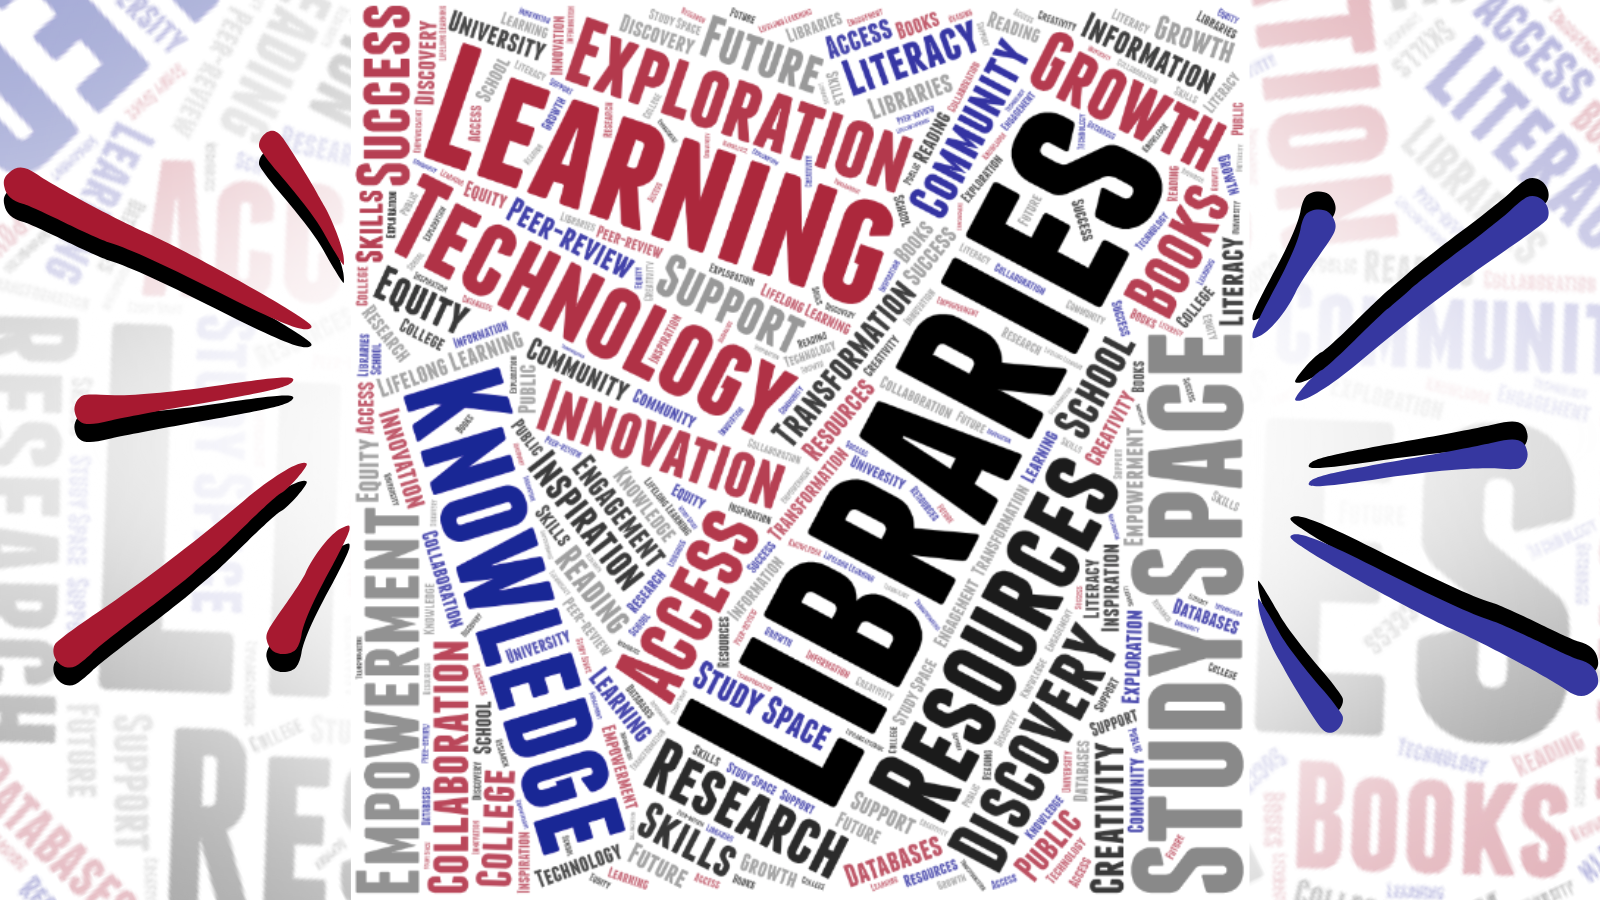 Dozens of words, arranged in a word cloud and emphasizing concepts related to libraries. Examples include learning, knowledge, resources, technology, exploration, growth, research, and more.